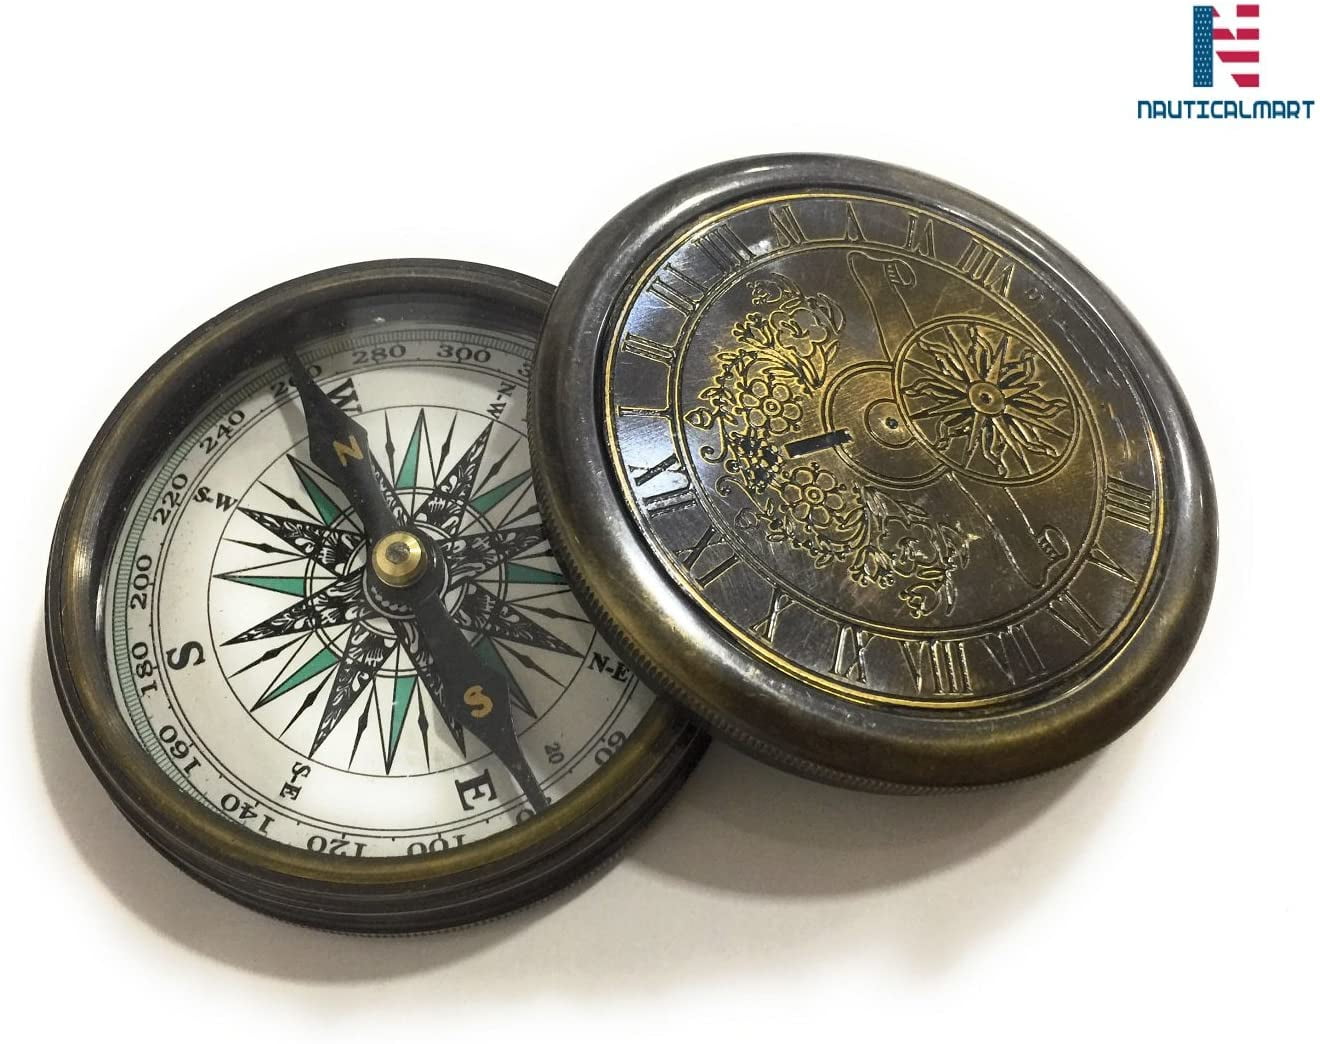 Details about   Antique Nautical Marine Robert Frost Compass For Gifting Item 